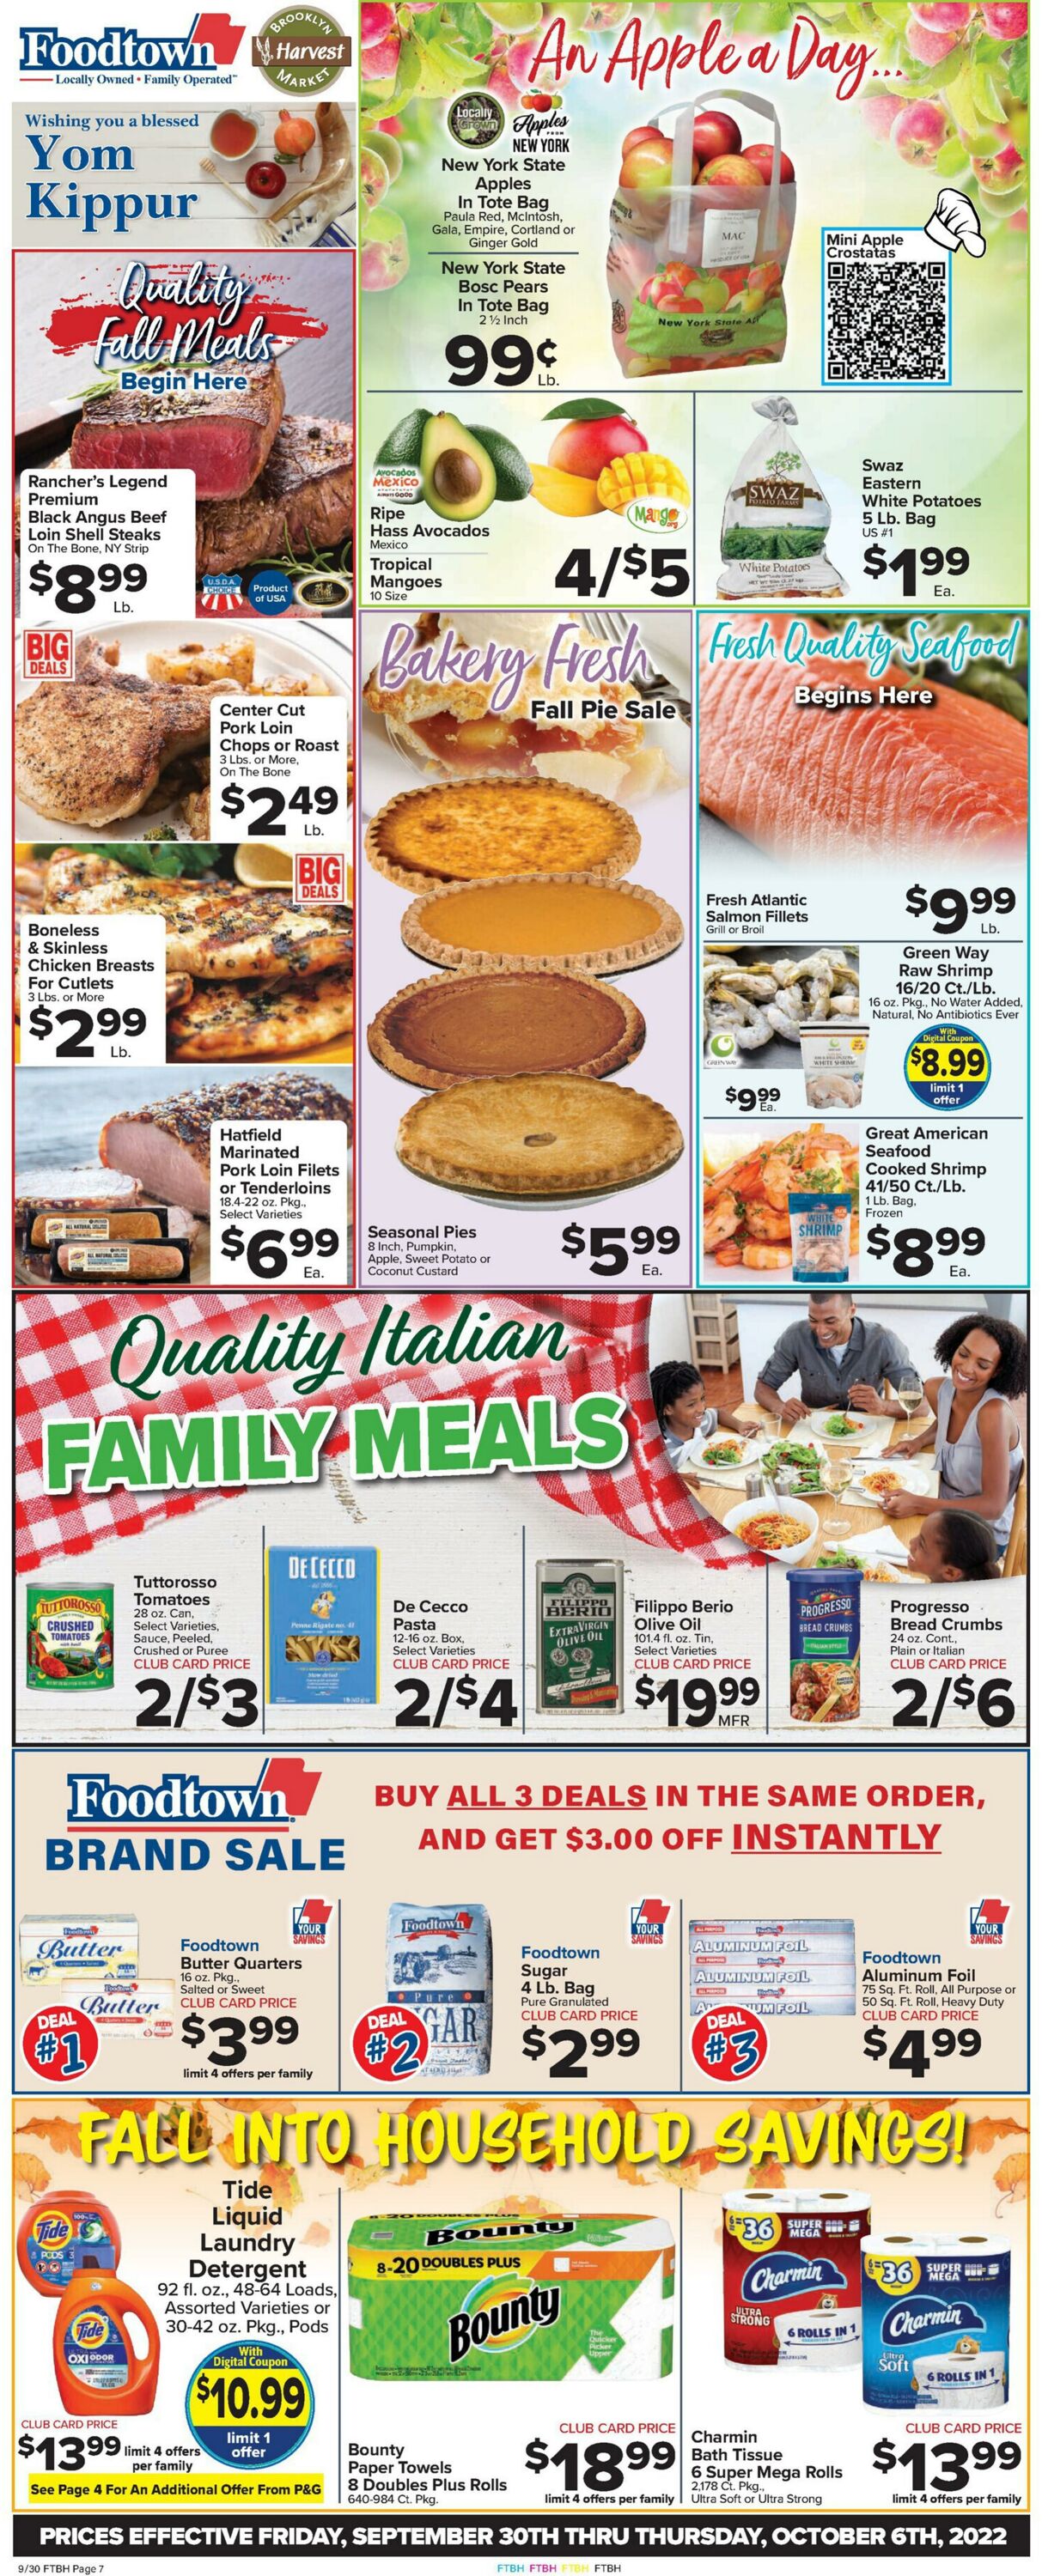 Food Town Promotional weekly ads